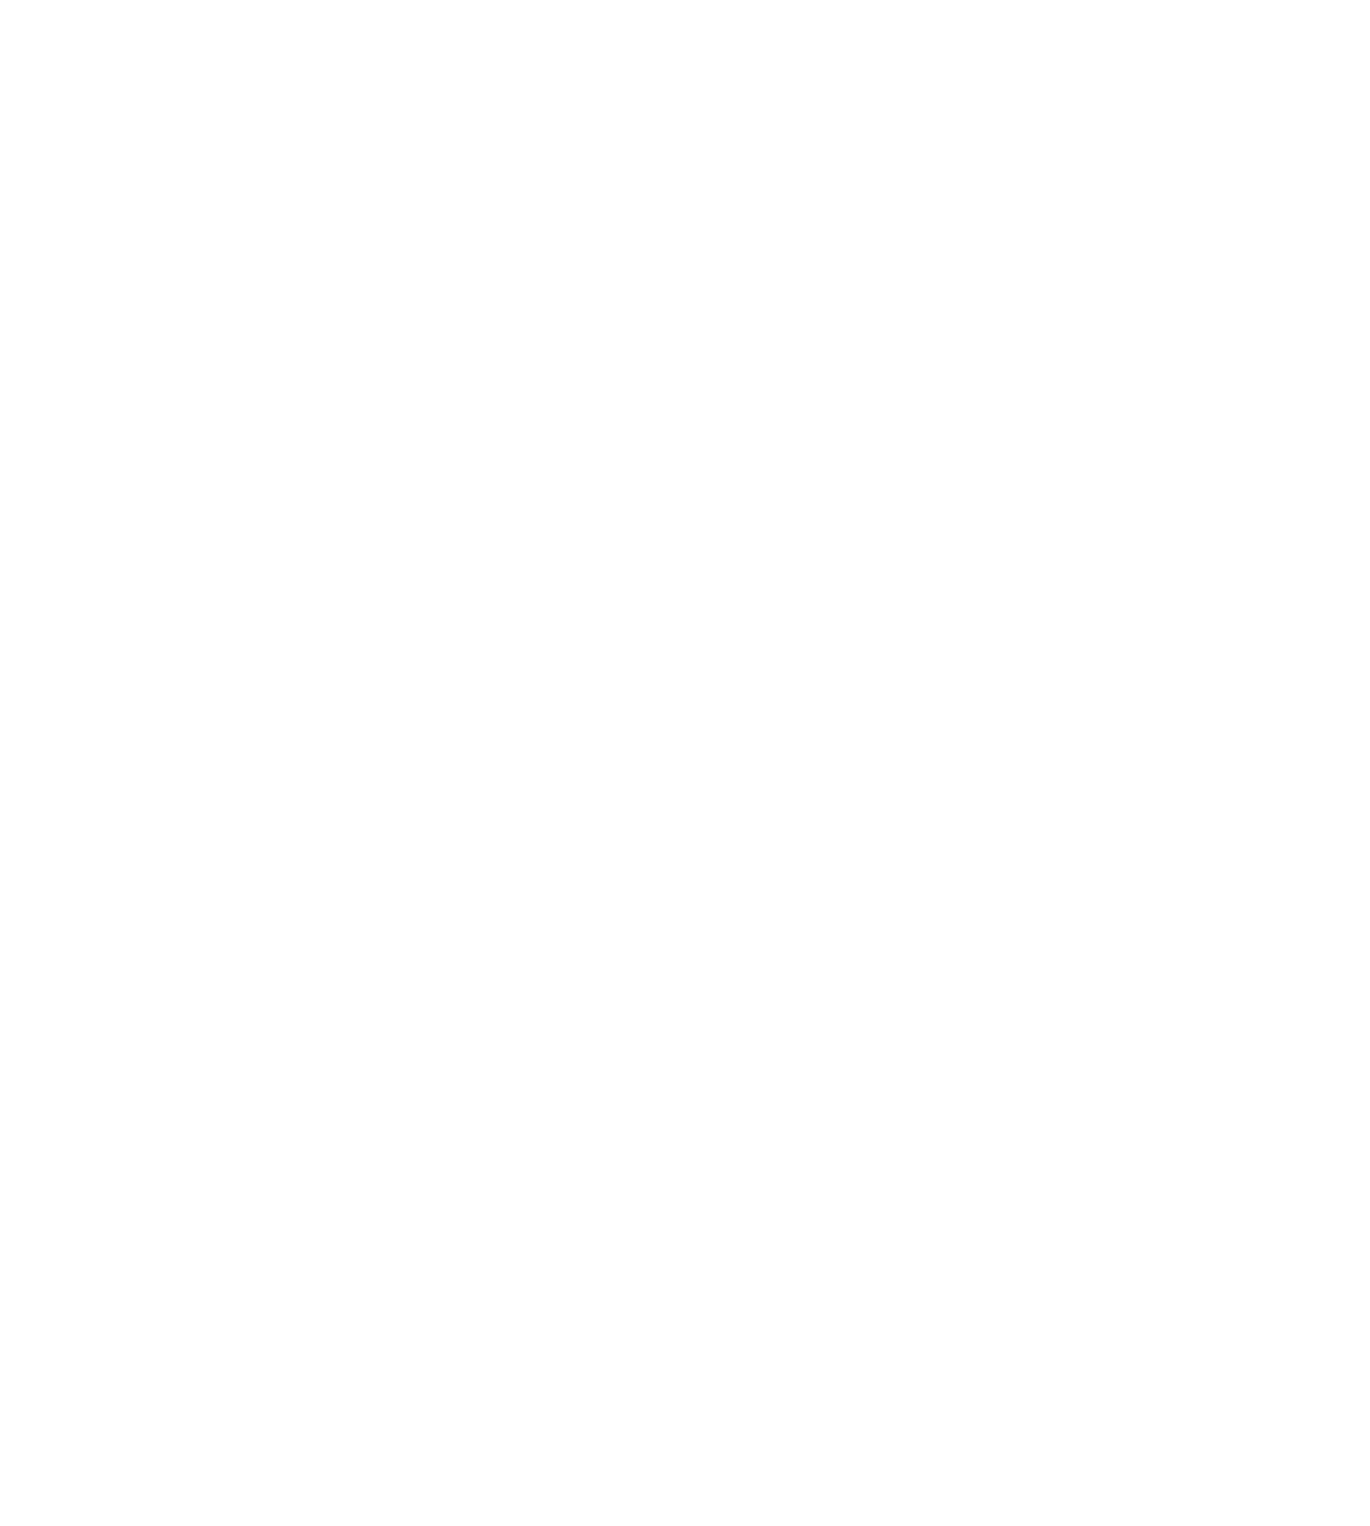 File:Indian Election Symbol Tree.png - Wikipedia